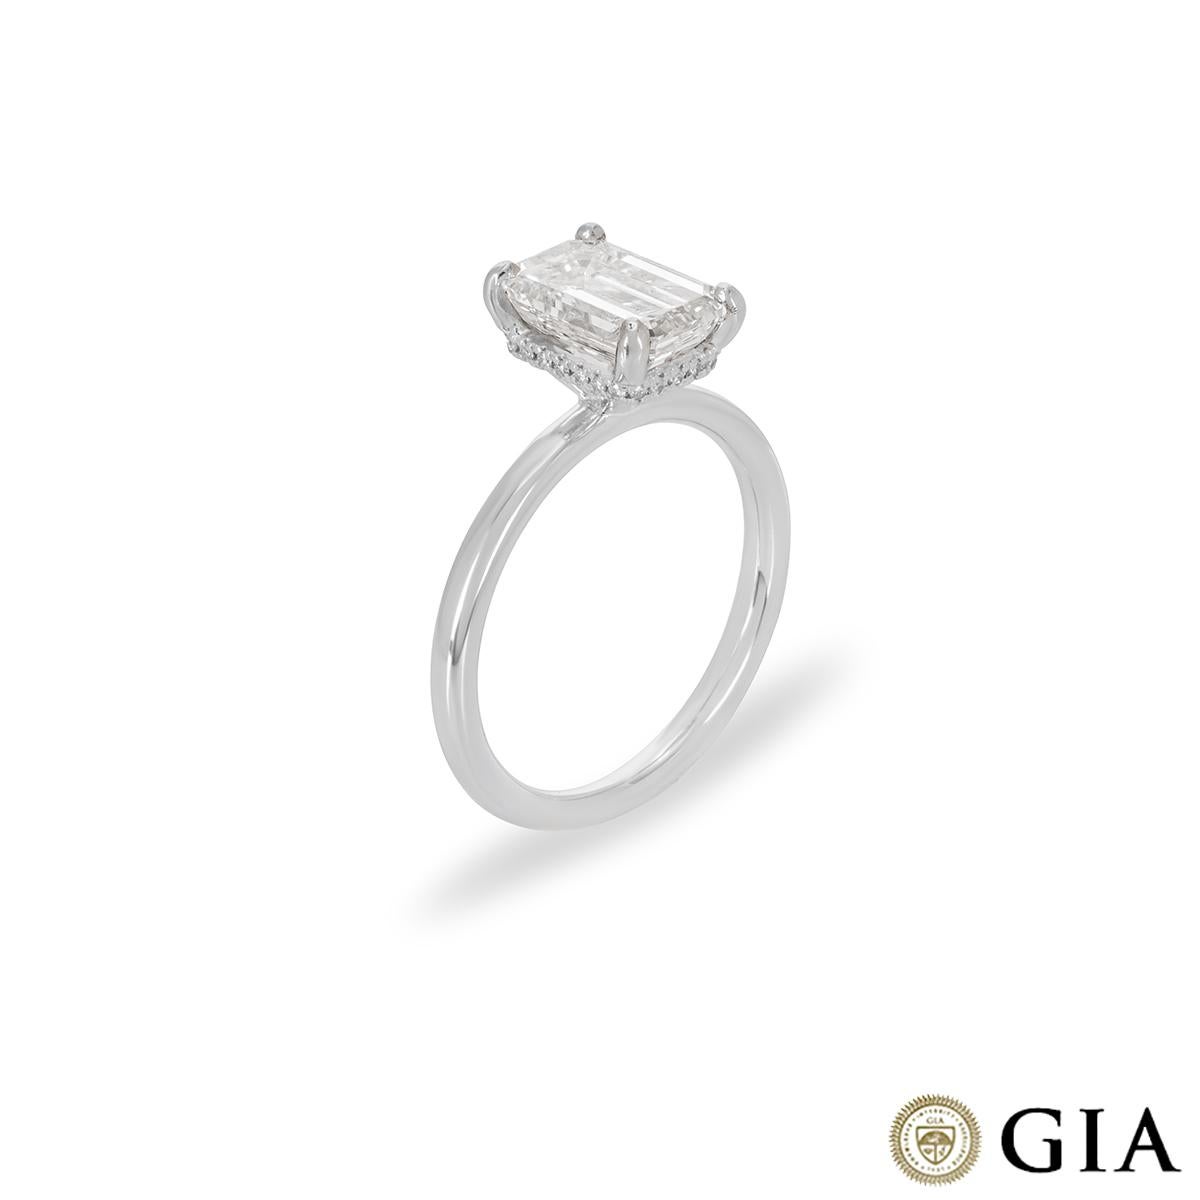 A mesmerising platinum diamond engagement ring. The solitaire is set to the centre with an emerald cut diamond weighing 1.80ct, H colour and VS1 clarity. The centre stone is accentuated by a hidden halo comprising of 24 round brilliant cut diamonds